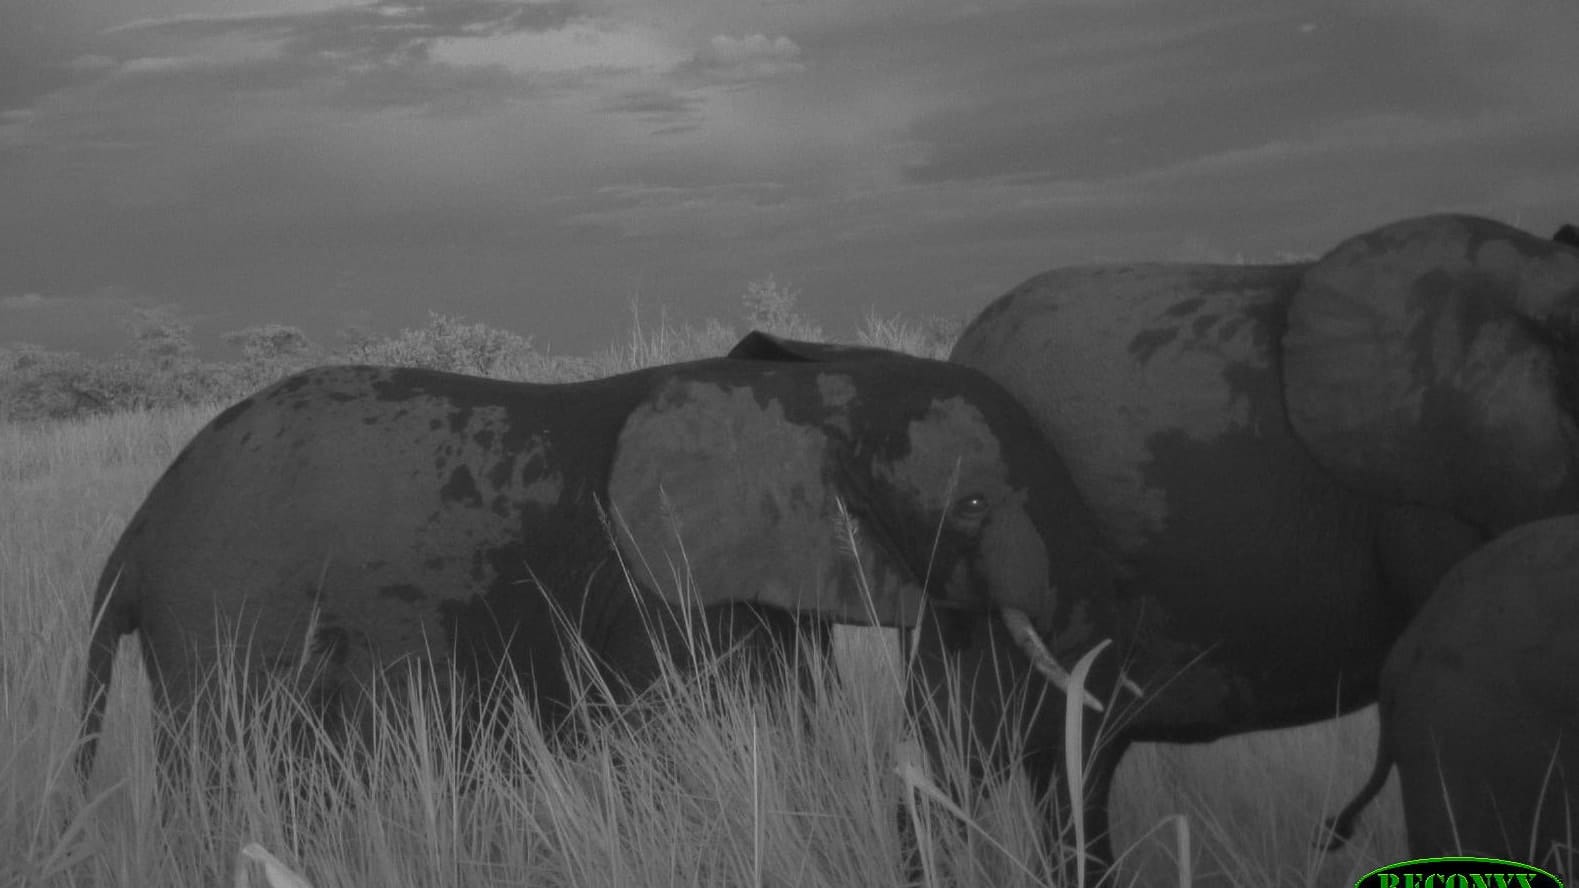 A black and white image of three elephants walking through grass.